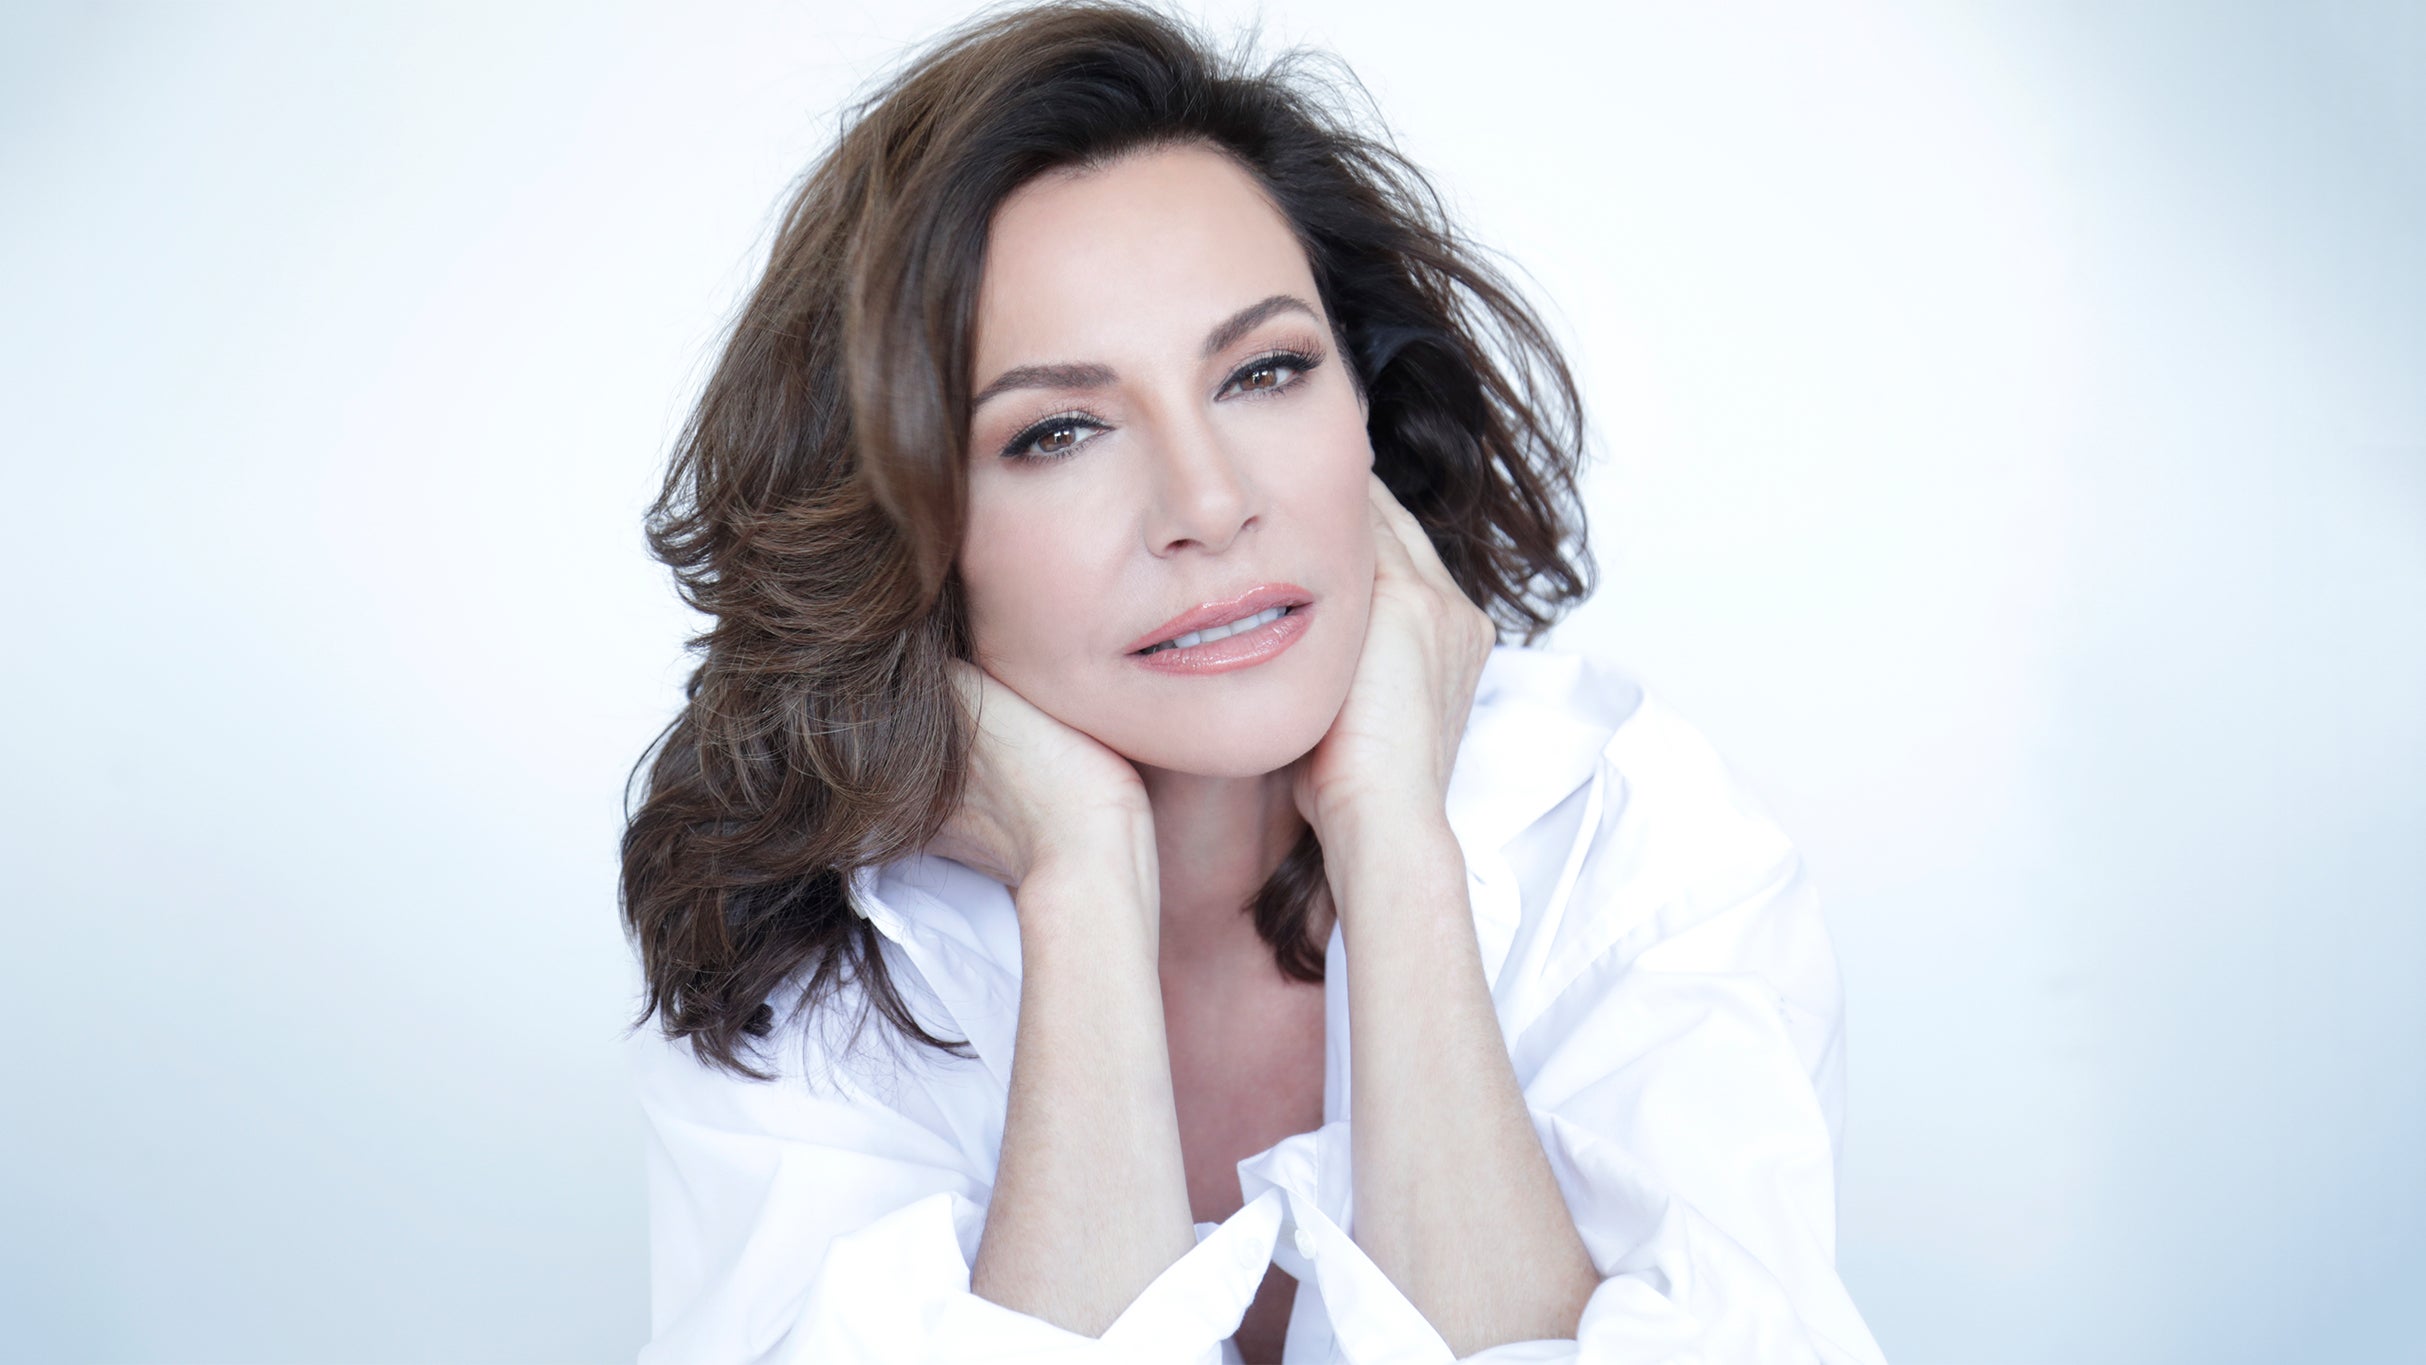 Countess Cabaret Starring Luann de Lesseps - 18+ Event in Dallas promo photo for Official Platinum presale offer code